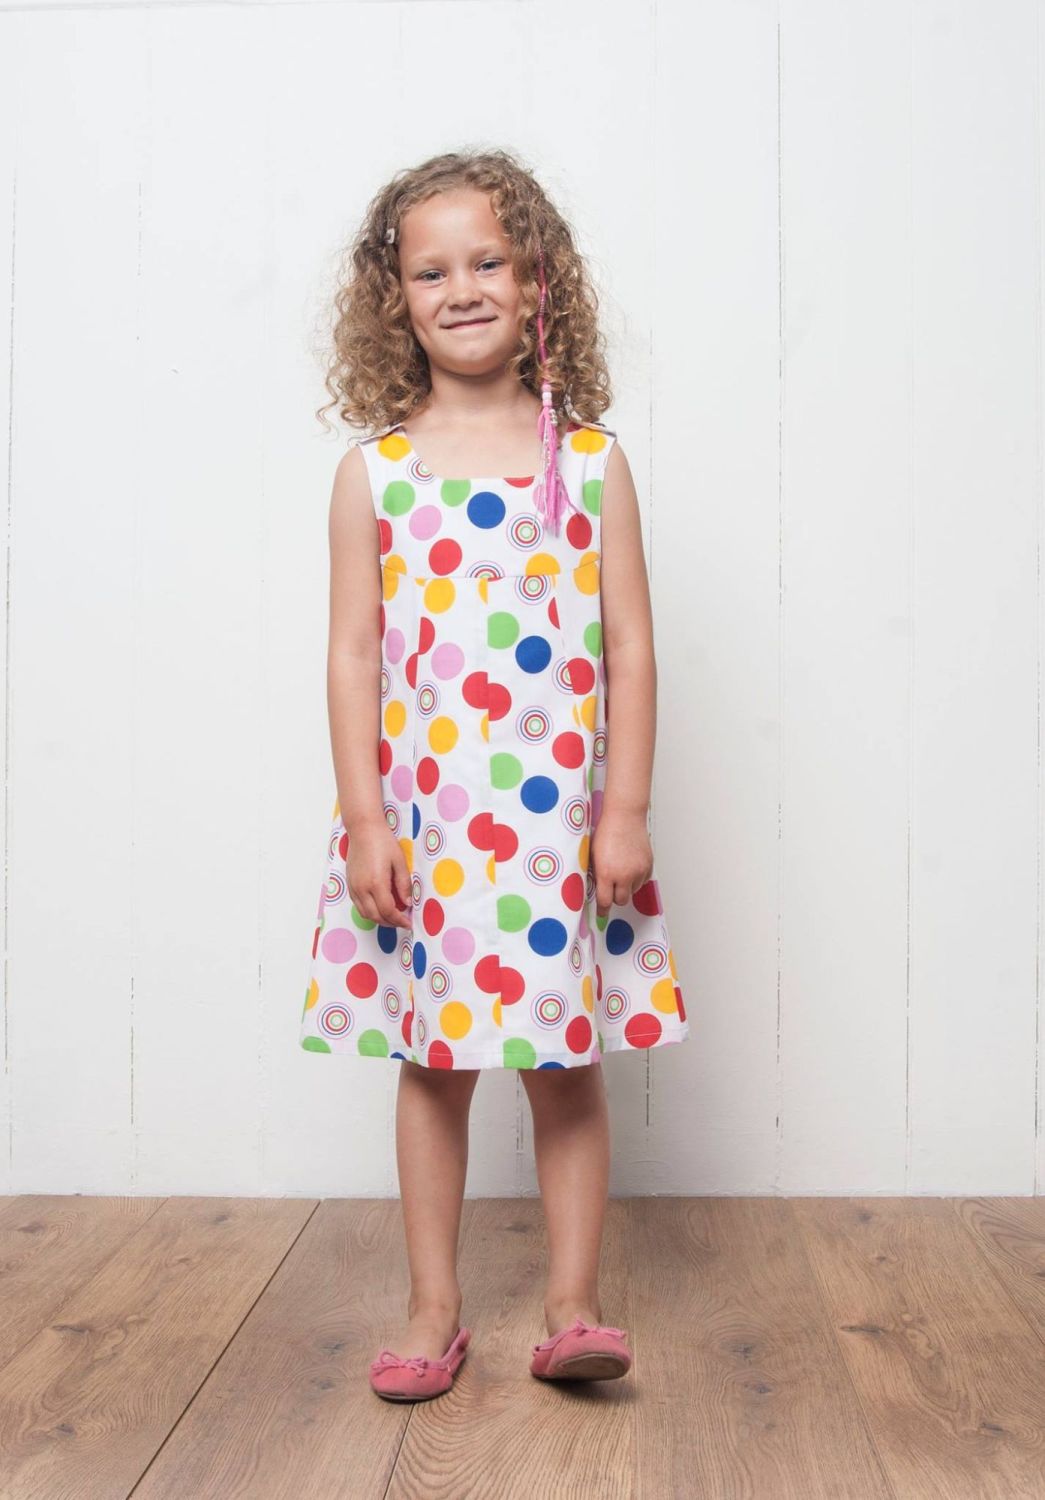 Circles Bright dress from £30.00